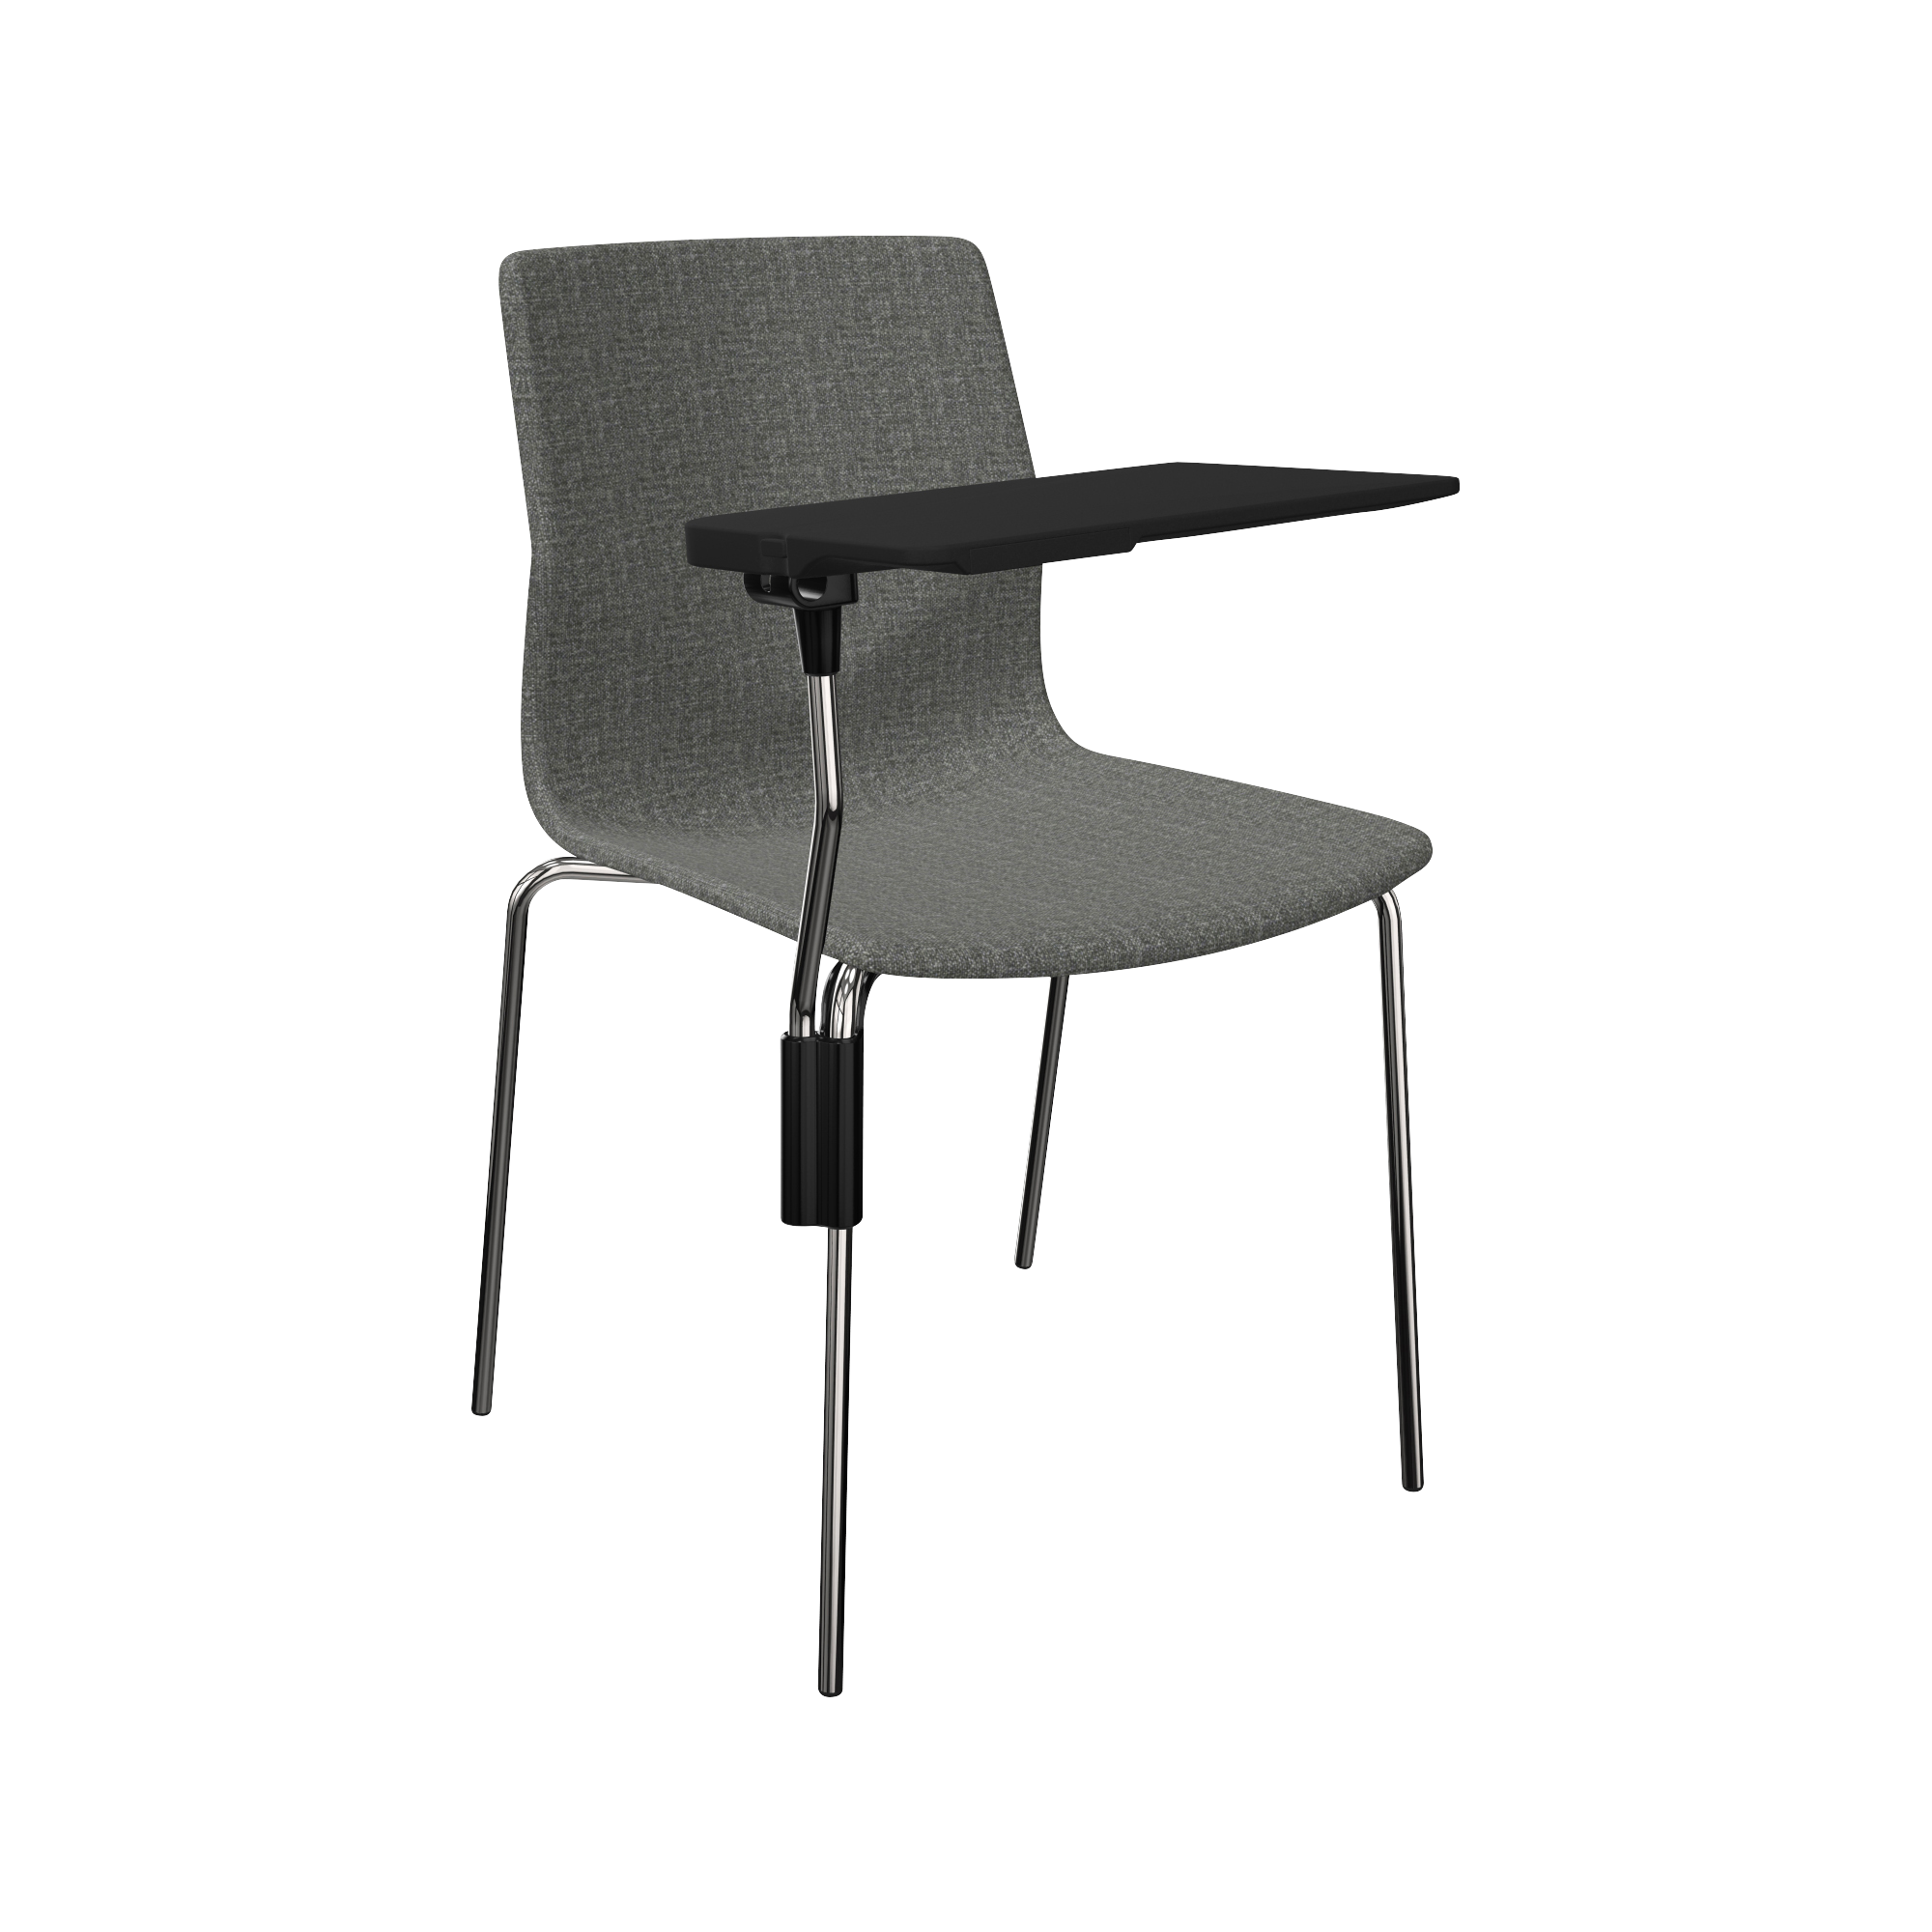 A grey designer desk chair with a desk attached